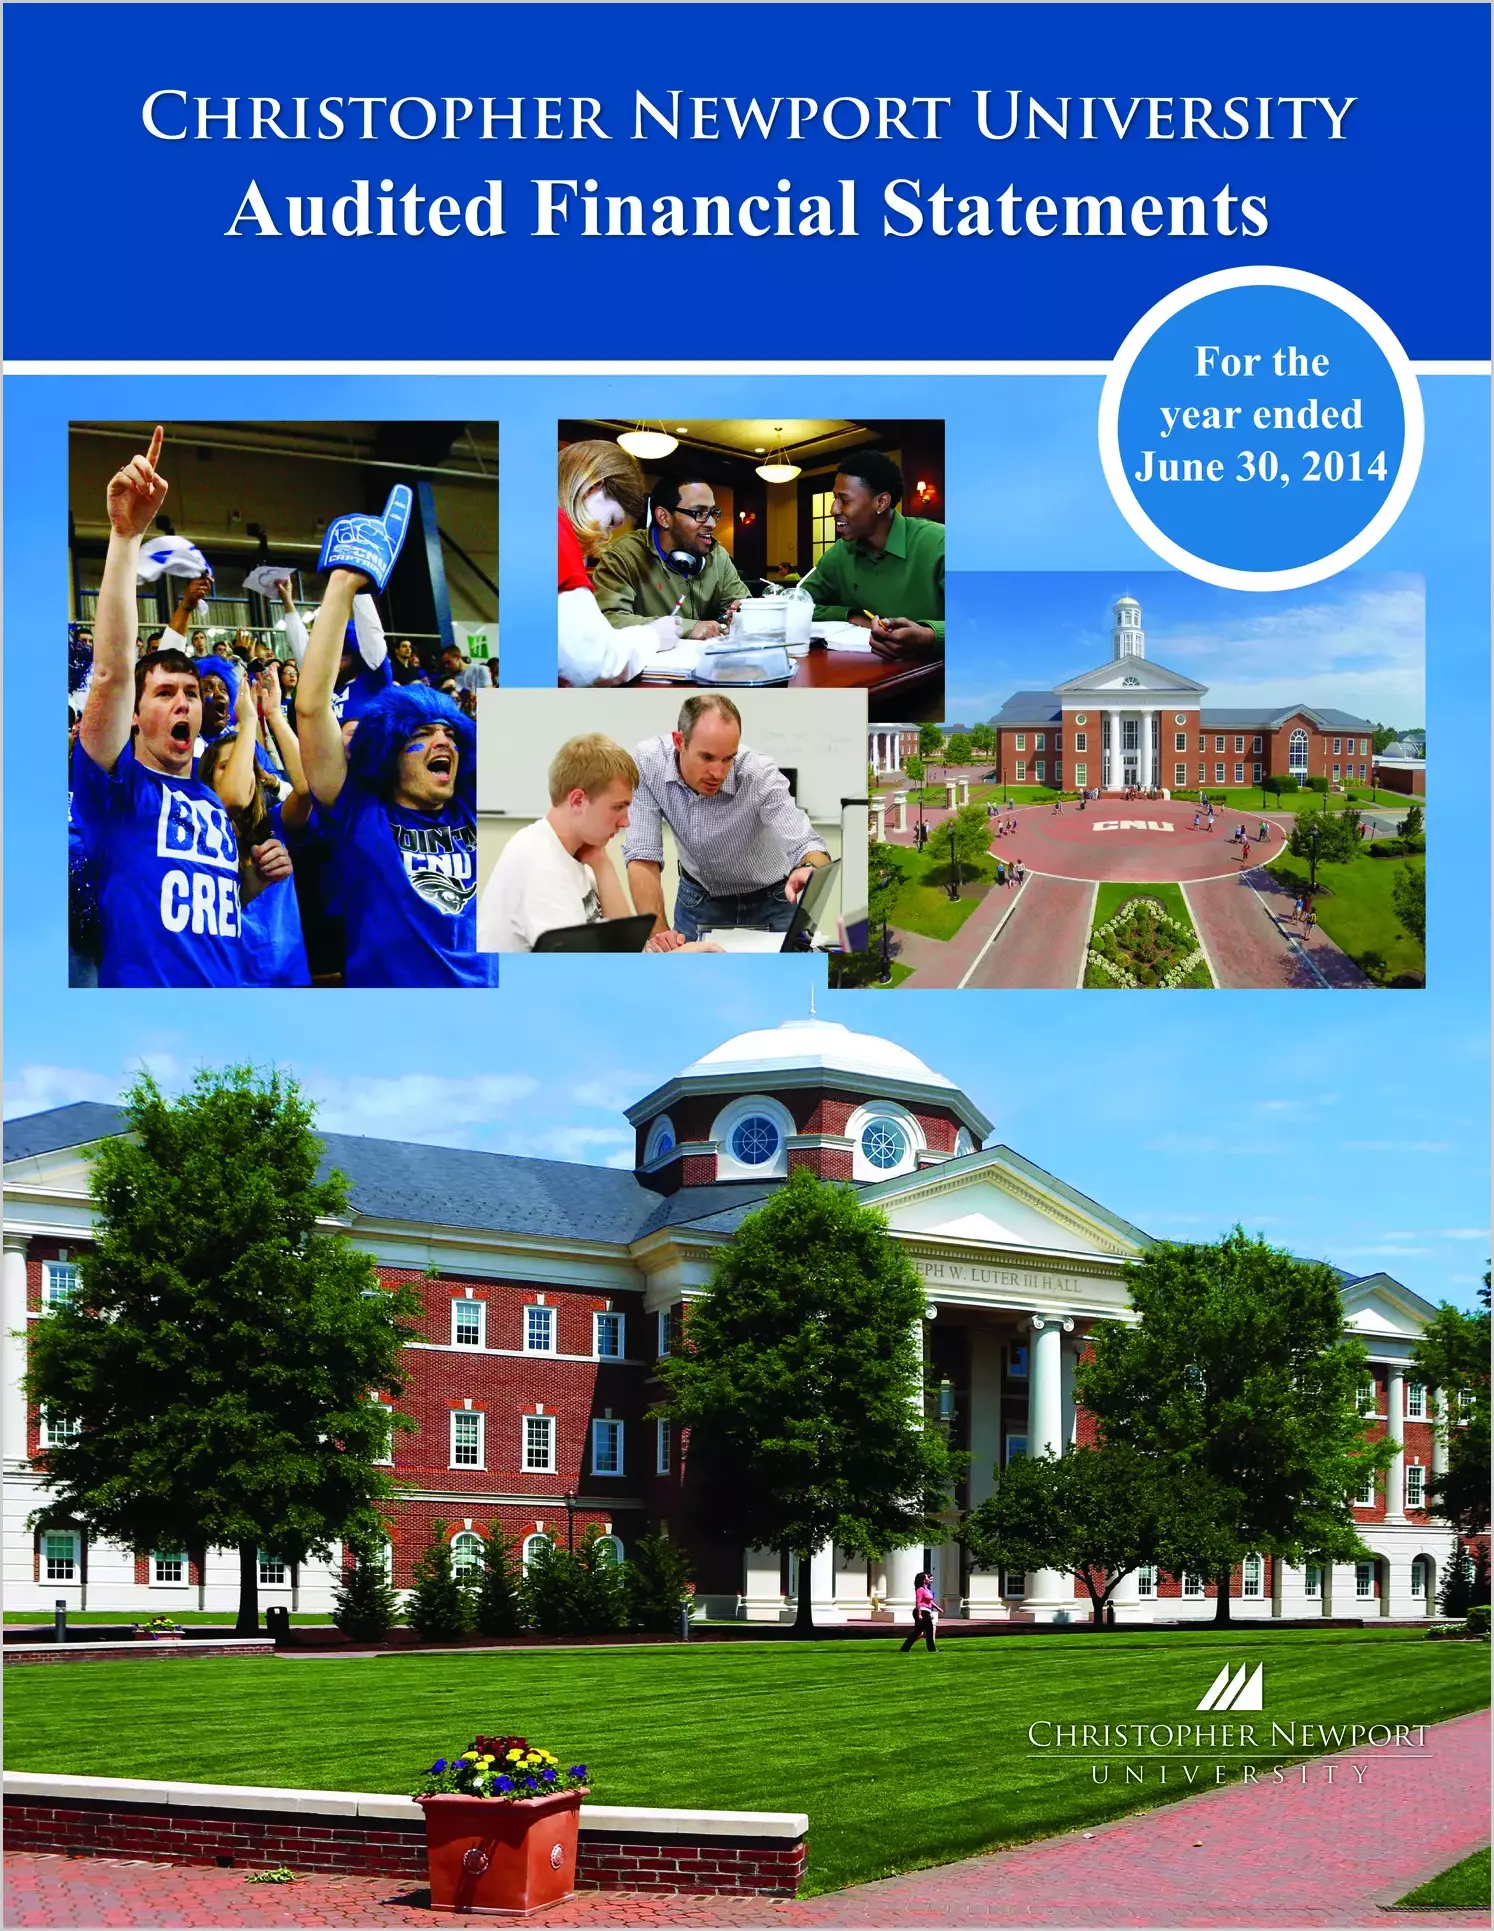 Christopher Newport University Financial Statements for the year ended June 30, 2014